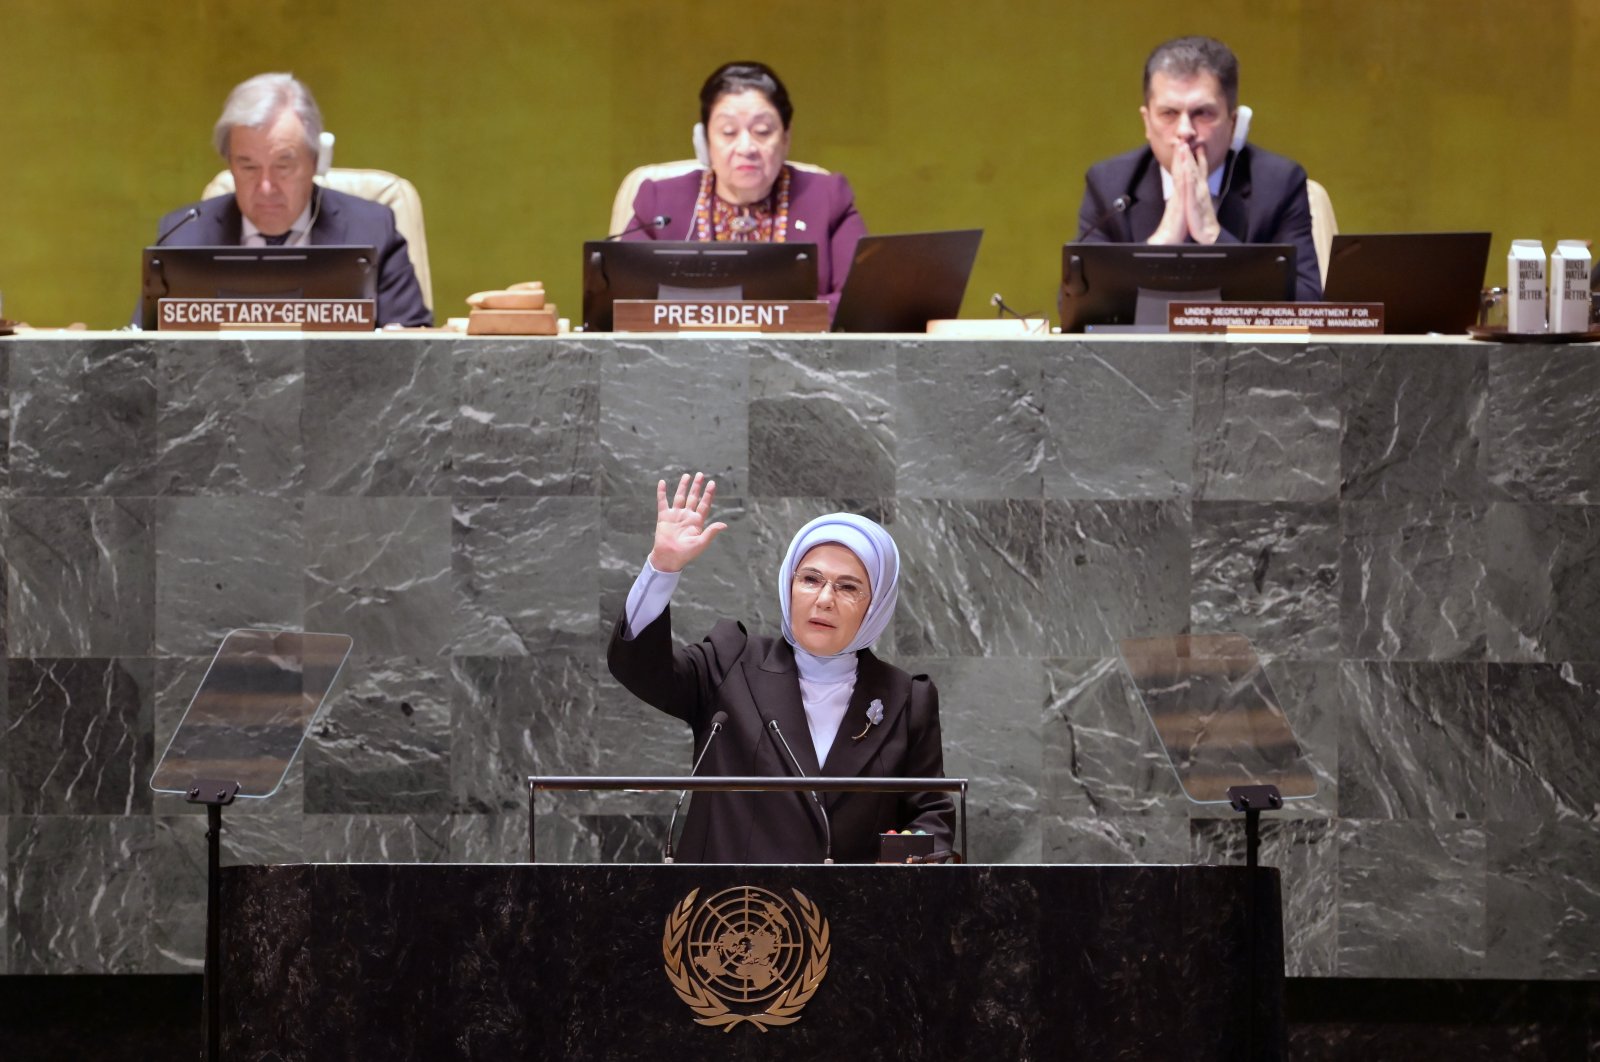 Türkiye&#039;s First Lady Emine Erdoğan delivers a speech during the U.N. General Assembly&#039;s high-level meeting on the occasion of International Zero Waste Day, in New York, U.S., March 30, 2022.